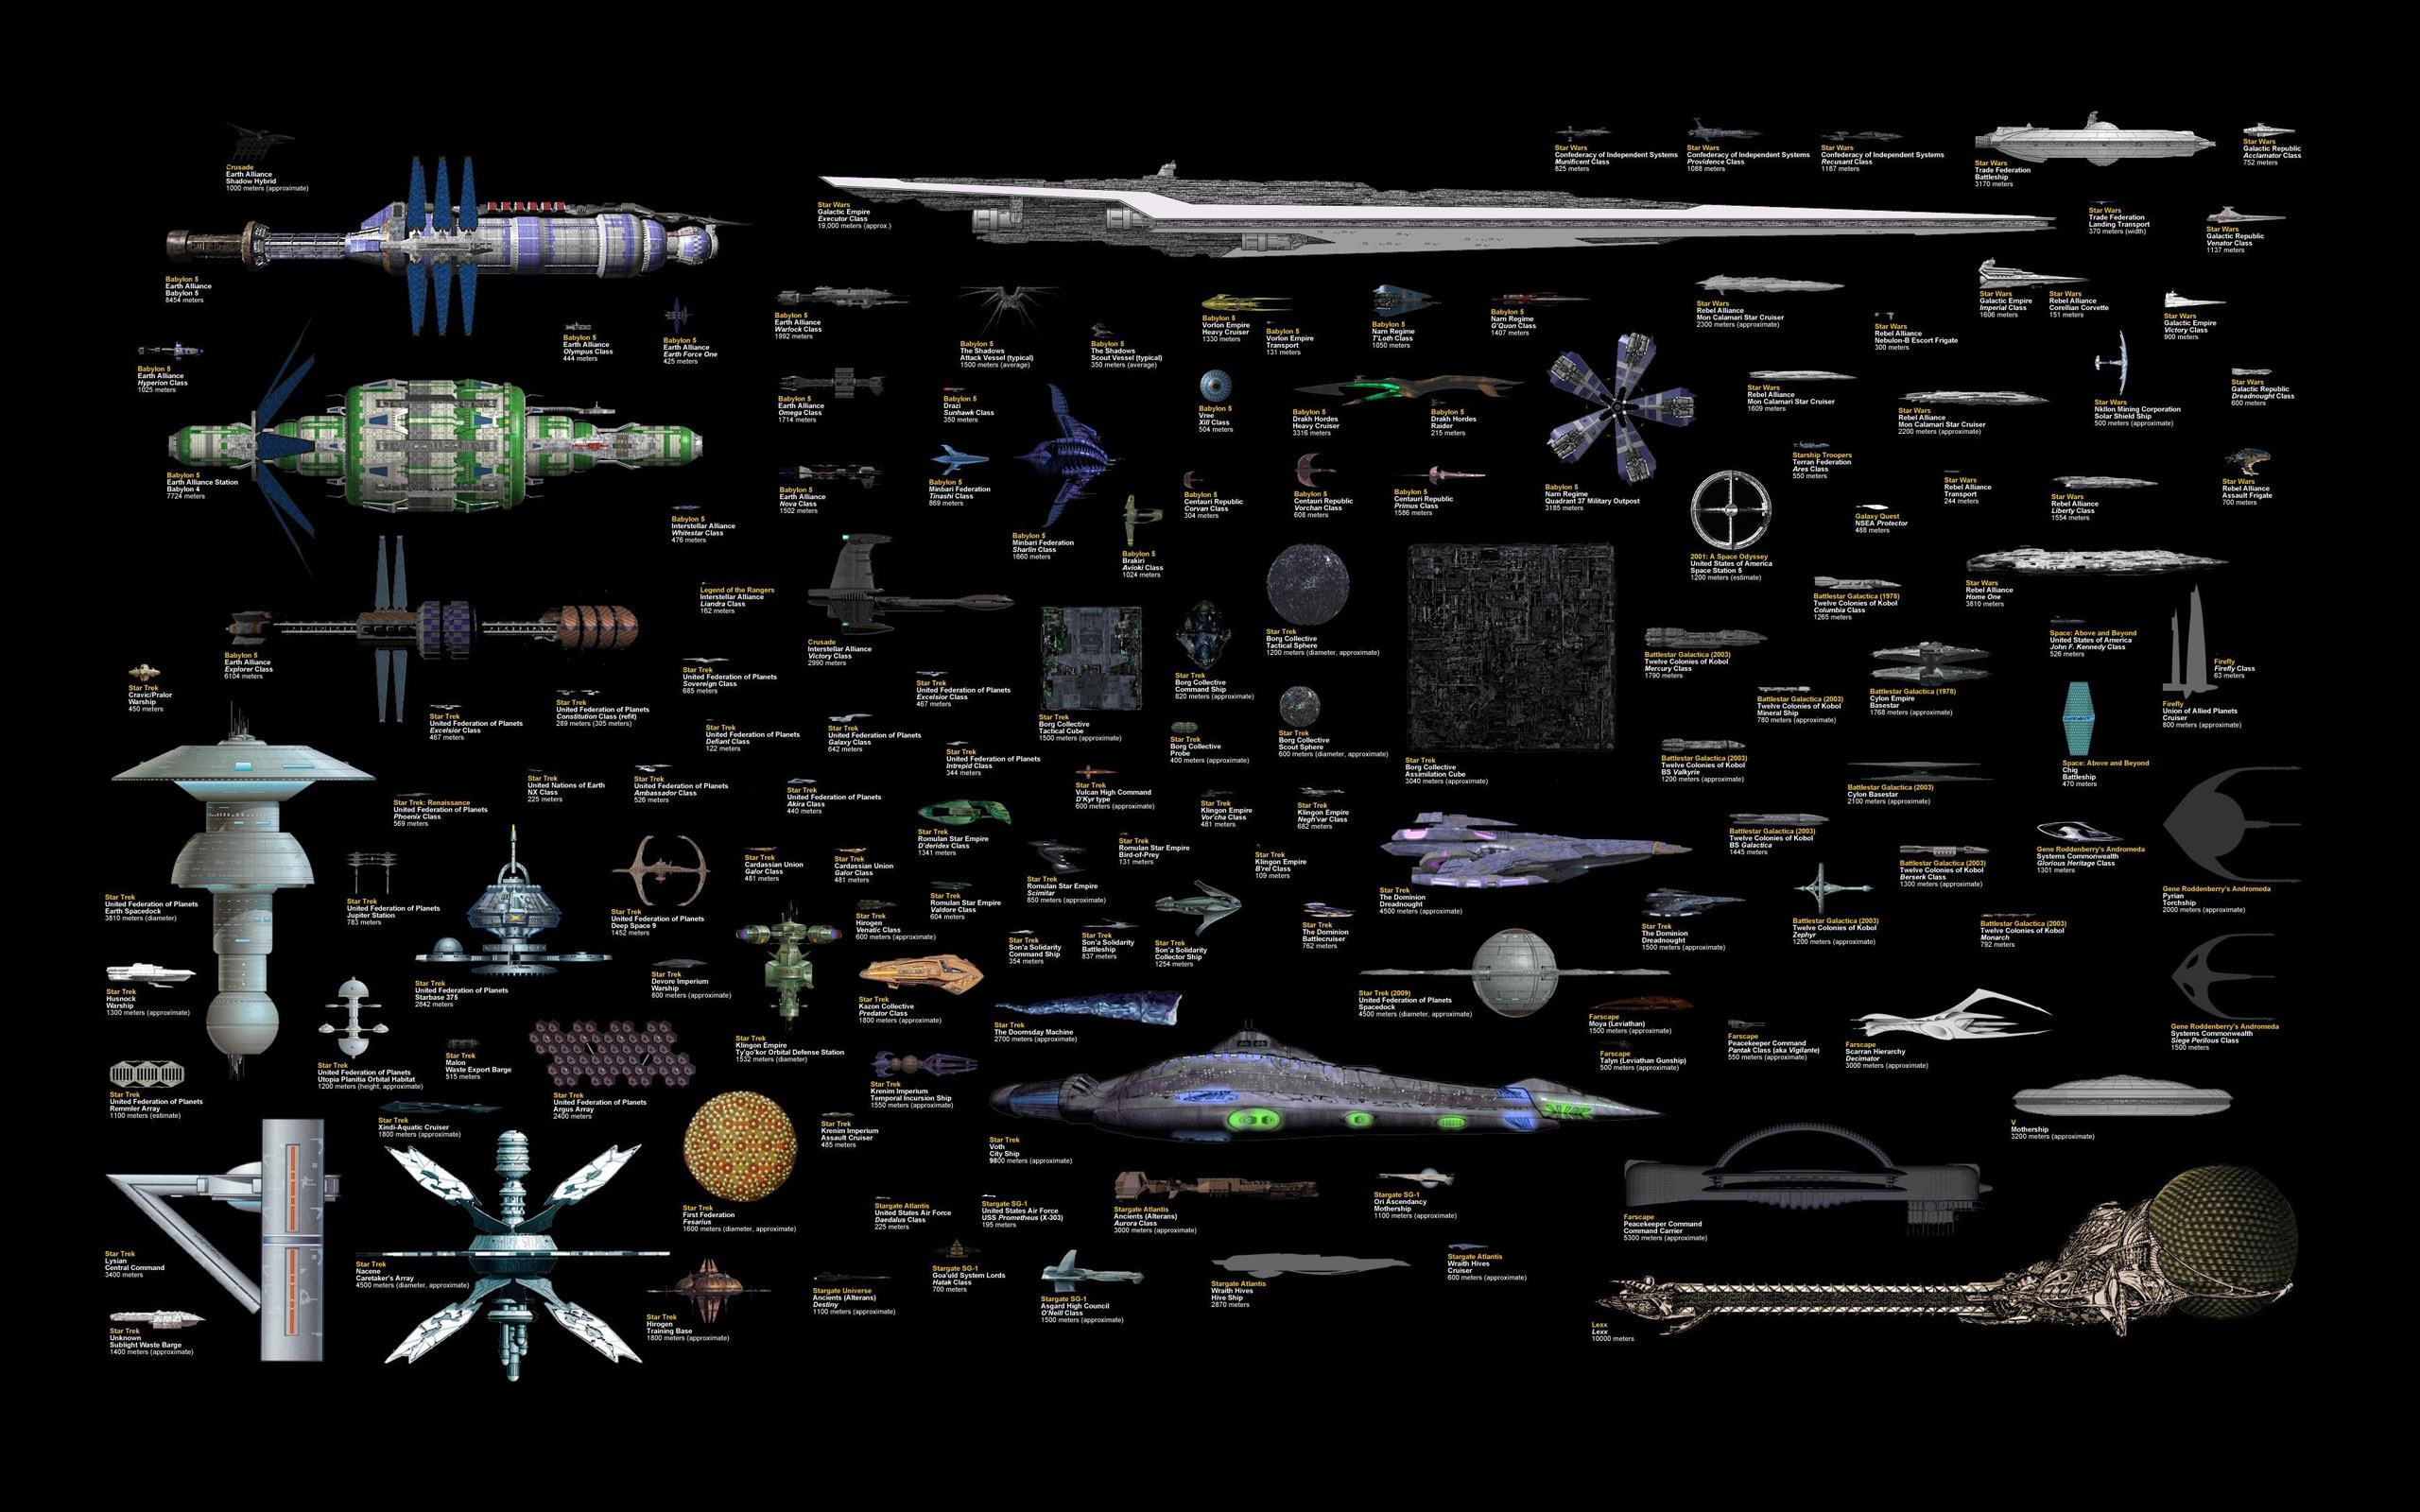 2560x1600 ... Stargate; Spaceships from movies